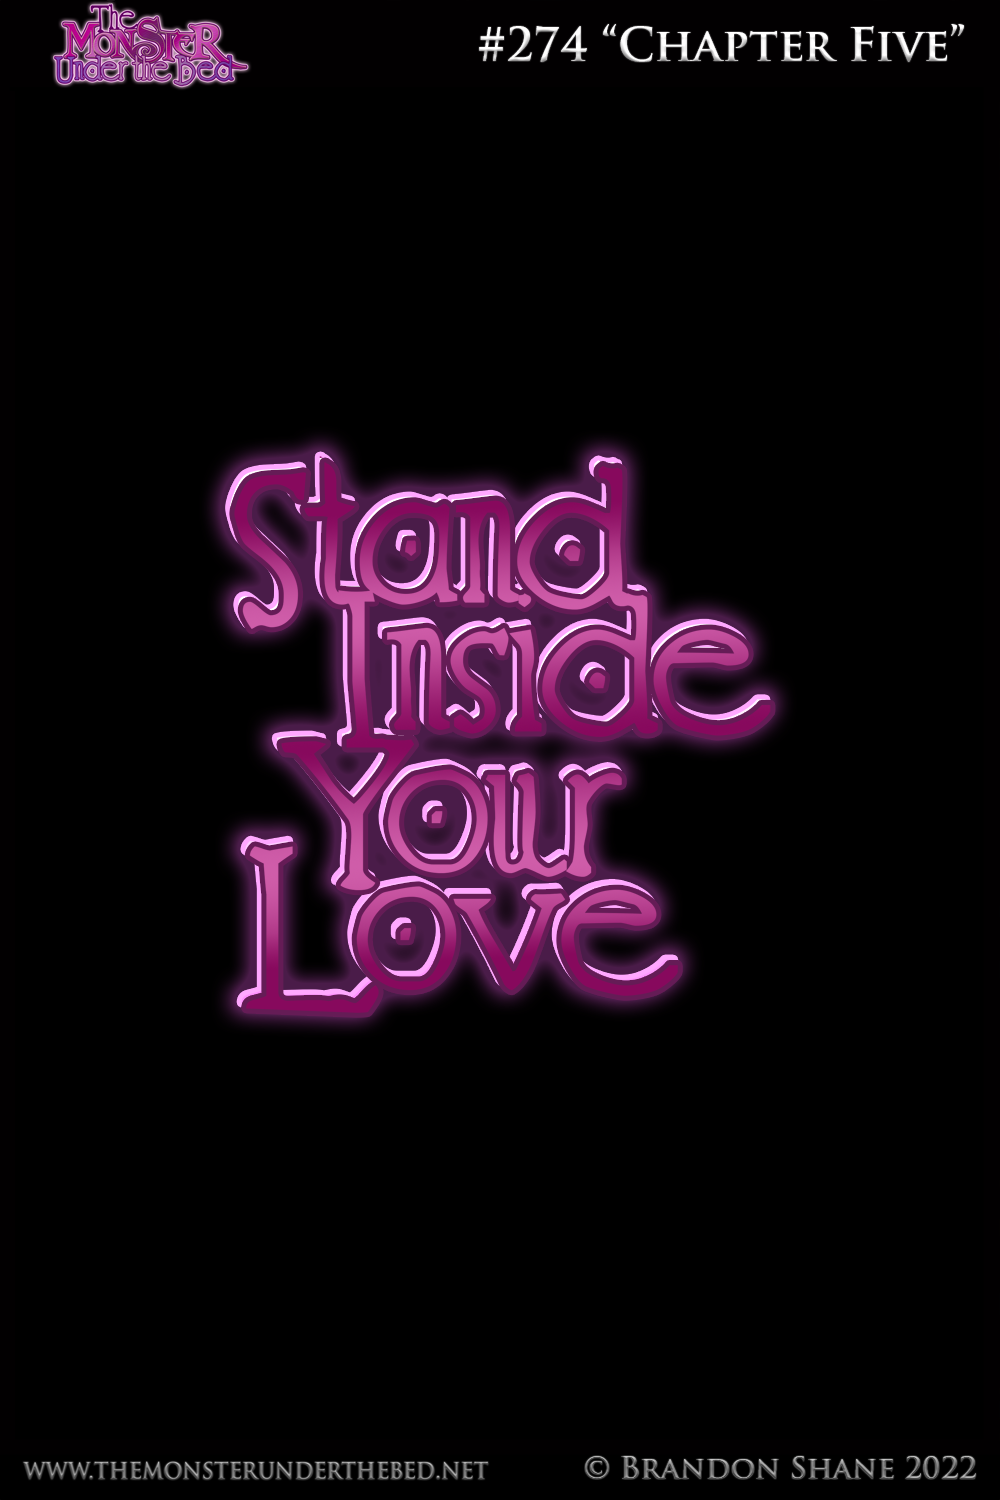 #274 “Stand Inside Your Love”